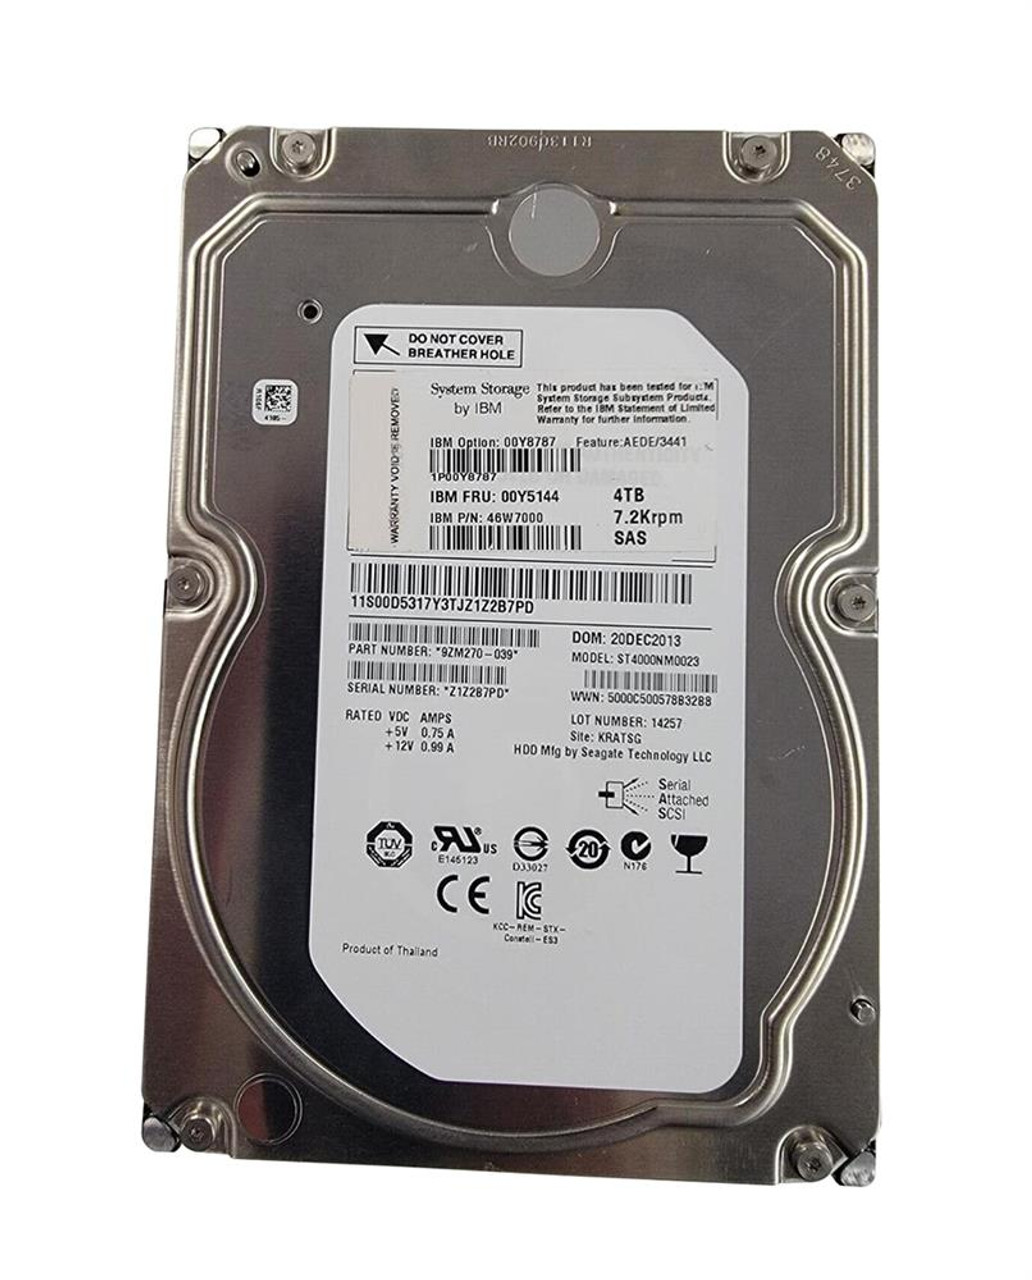 Dell Dcs3700 4TB 7200RPM SAS 6Gbps 3.5-inch Internal Hard Drive with Tray